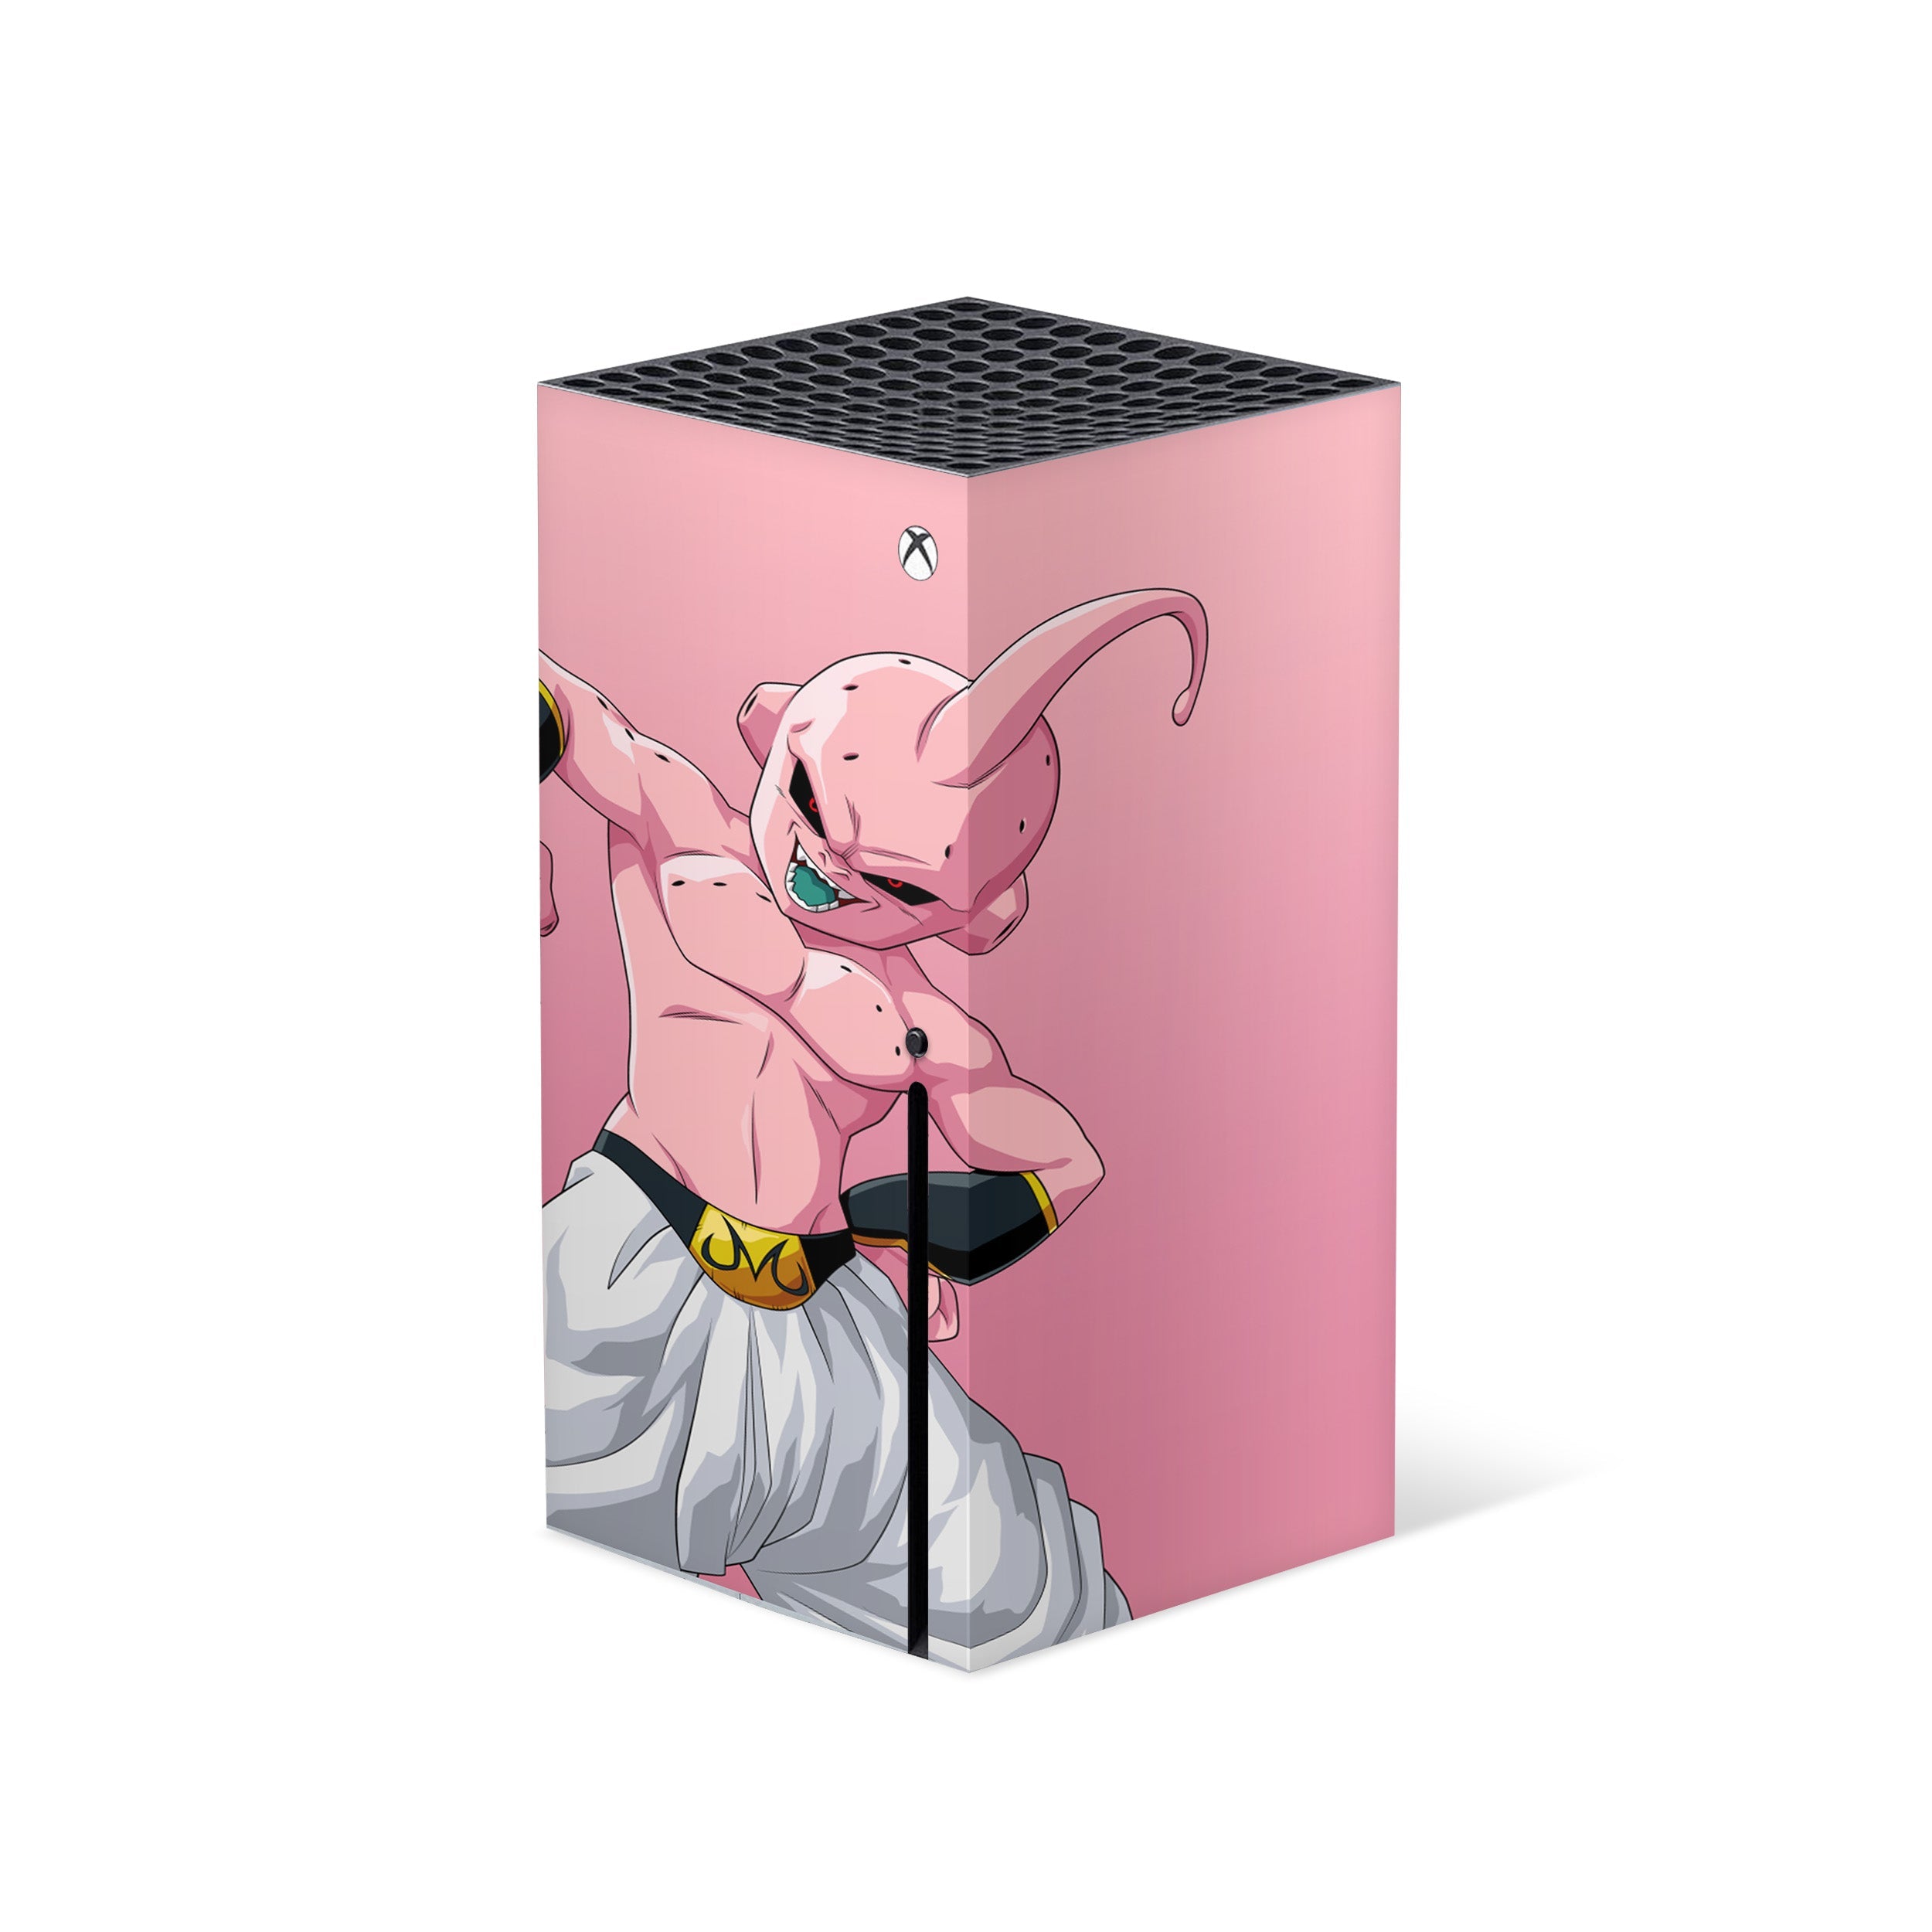 A video game skin featuring a Dragon Ball Z Kid Buu design for the Xbox Series X.